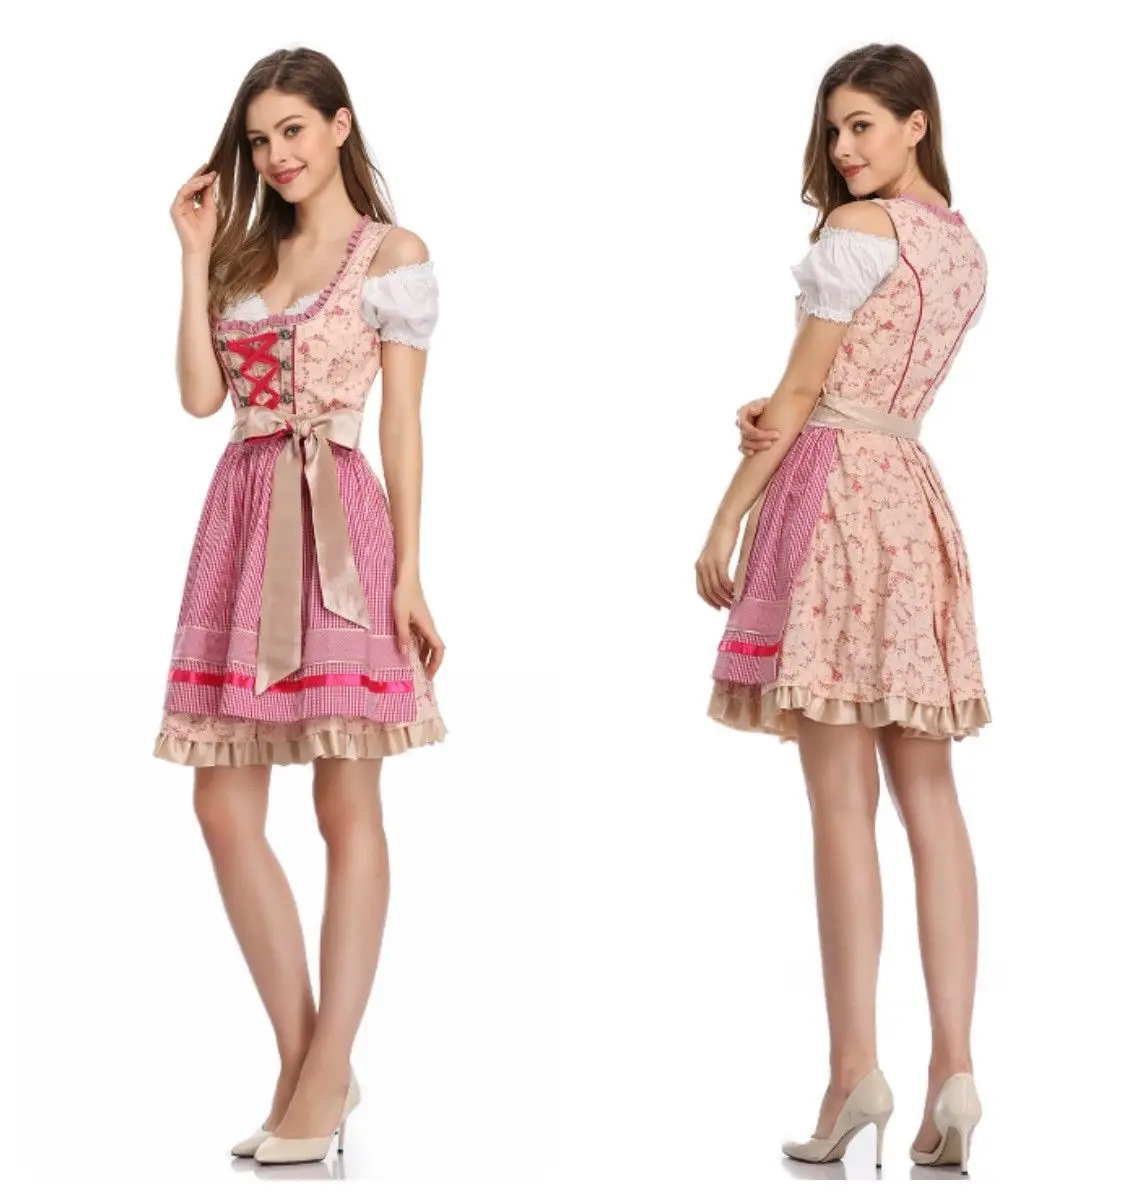 anker Tilskynde tragt Ecoparty Plus Size Oktoberfest Traditional German Beer Girl Costume Dirndl  - Buy Women S Oktoberfest Costumes,Germanybeercostume,Country Girl Costume  Product on Alibaba.com